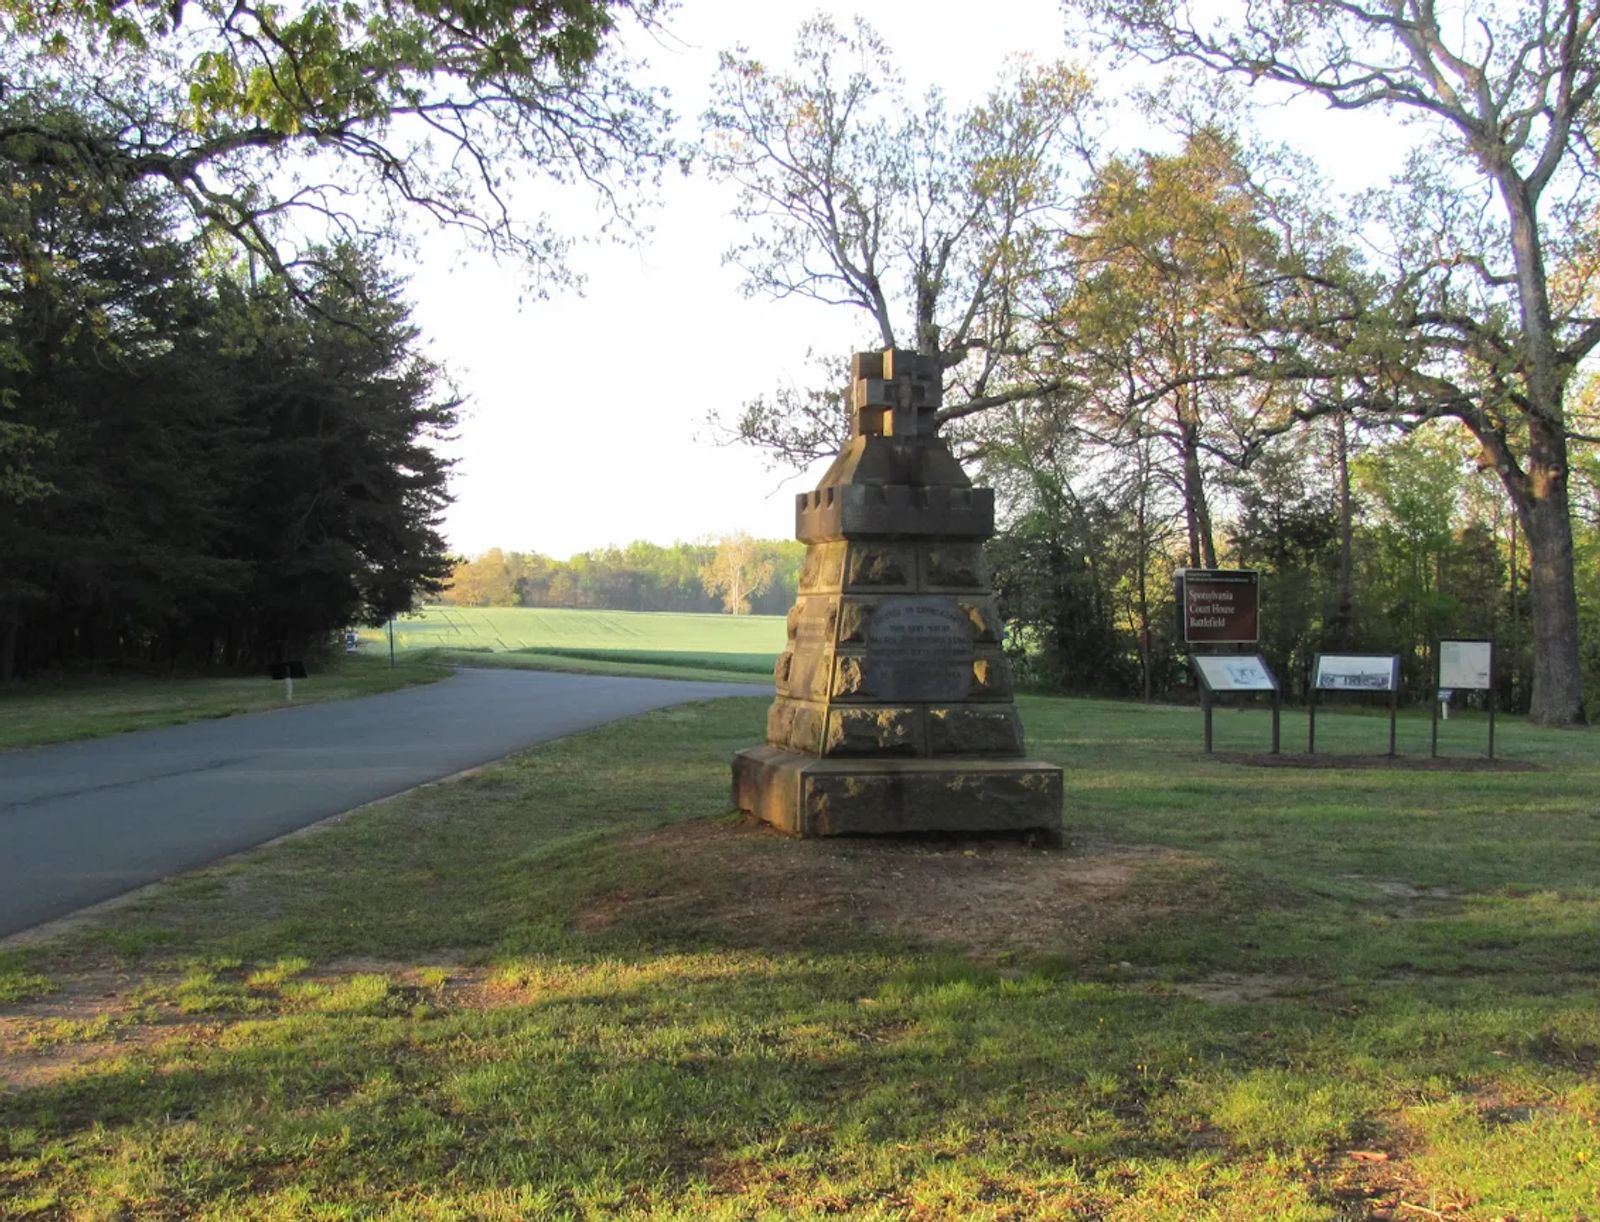 The General John Sedgwick monument in Spotsylvania Battlefield marks the spot where Sedgwick was shot and killed. He was the highest ranking Union causality of the Civil War.